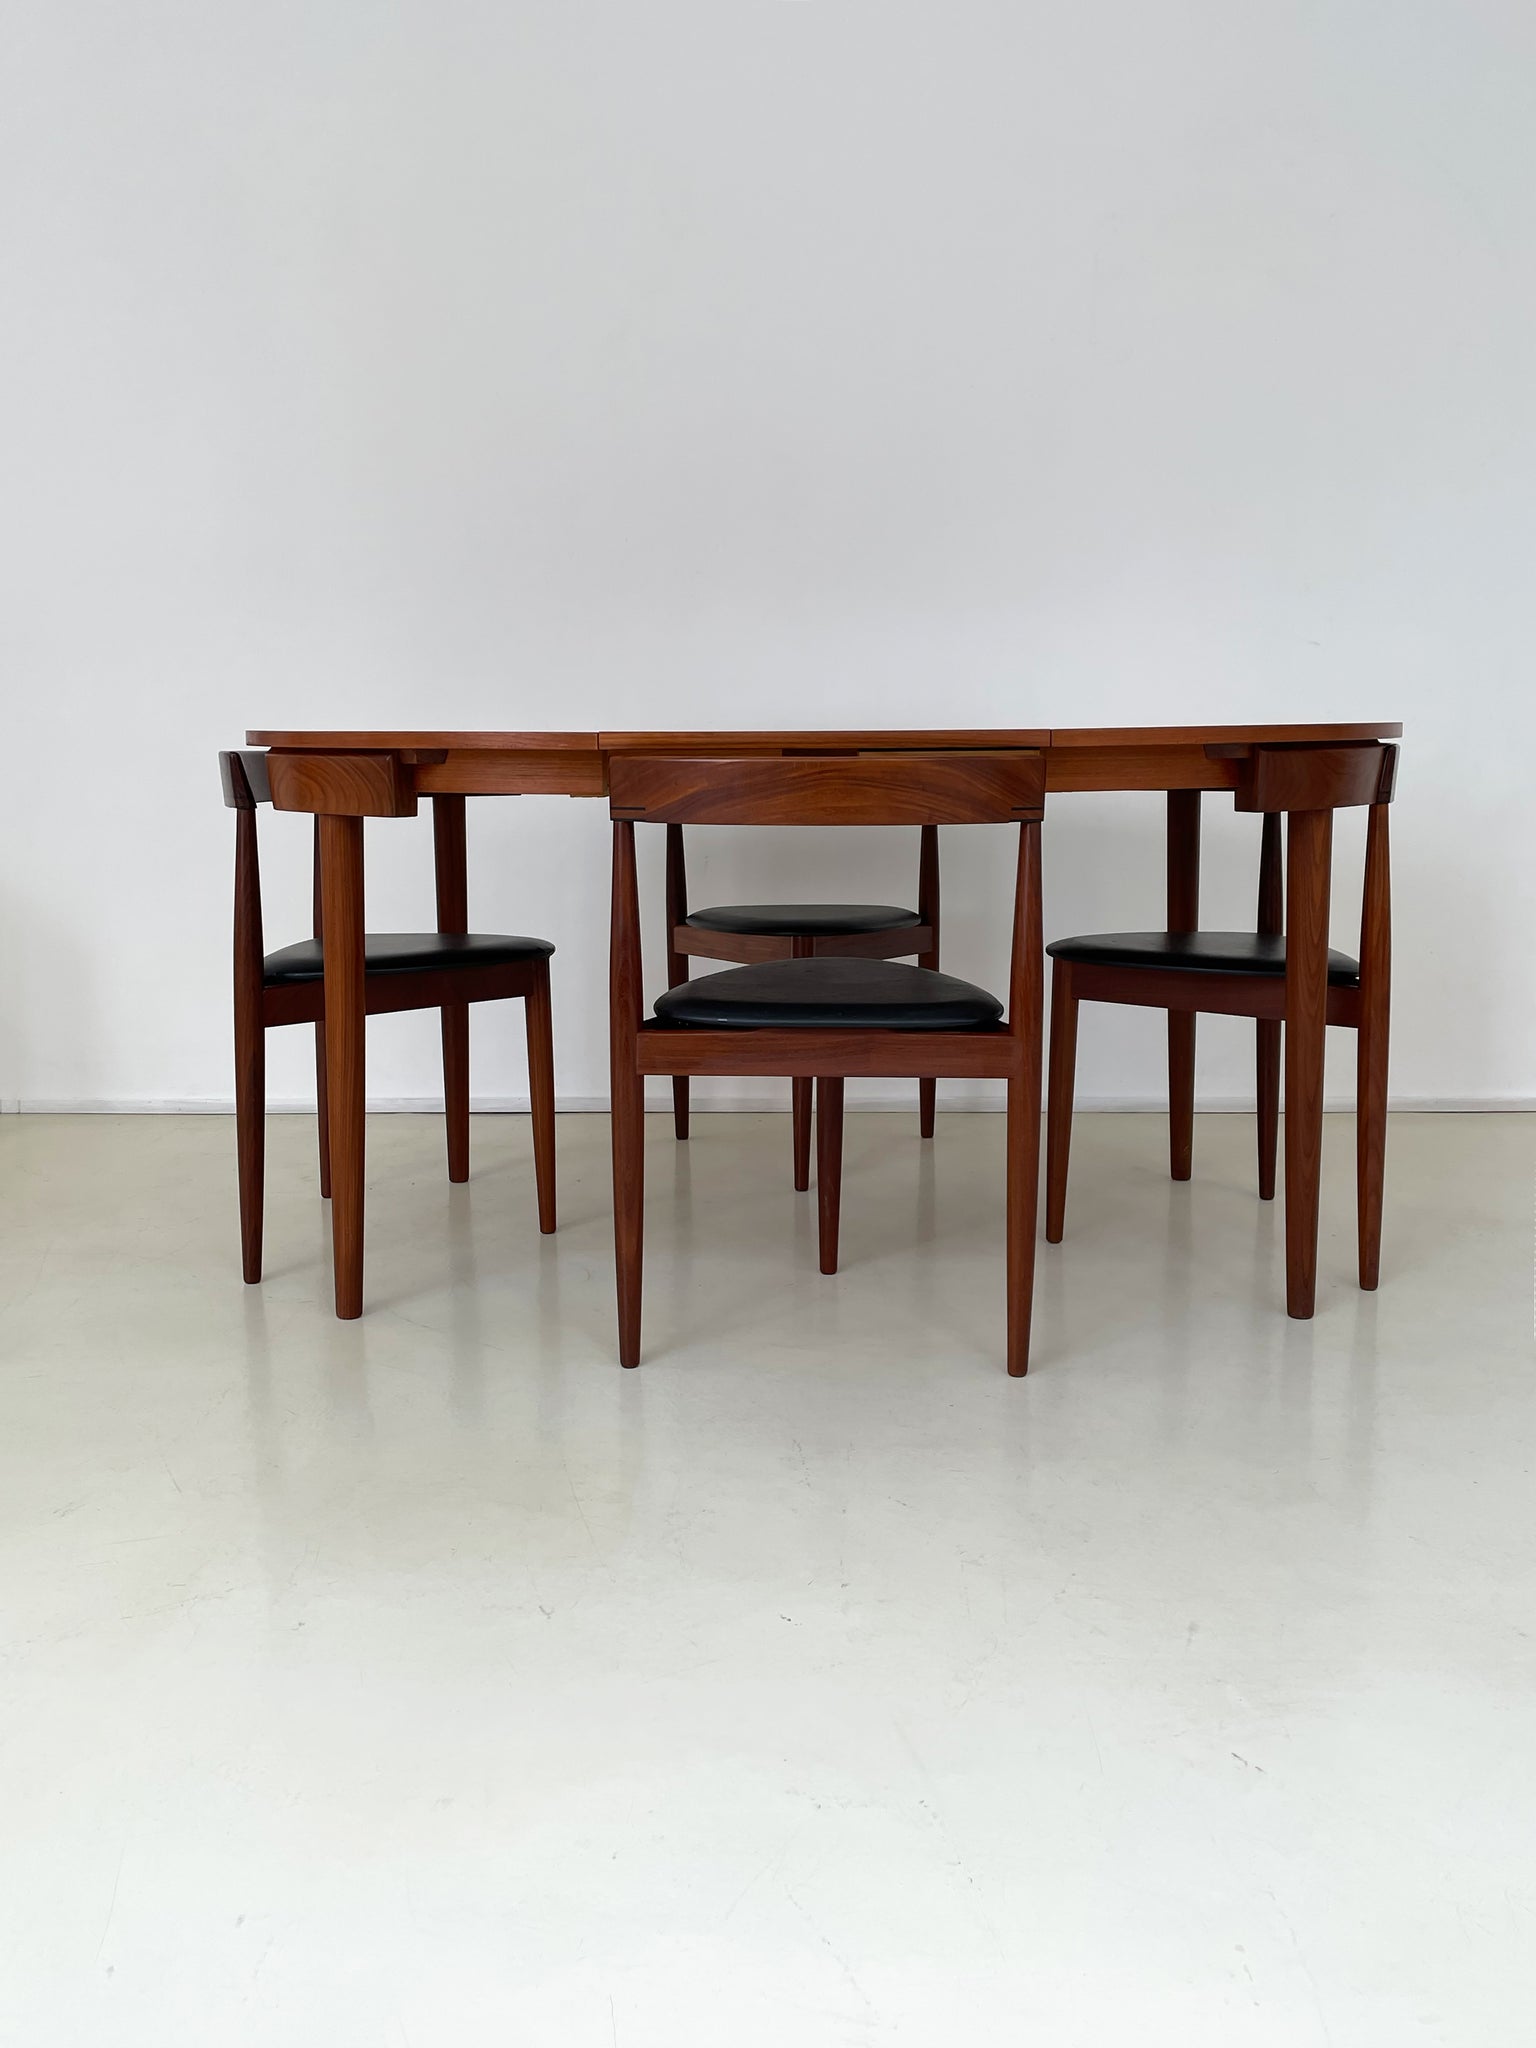 1960s "Roundette" Teak Dining Table w/4 Chairs by Hans Olsen for Frem Røjle